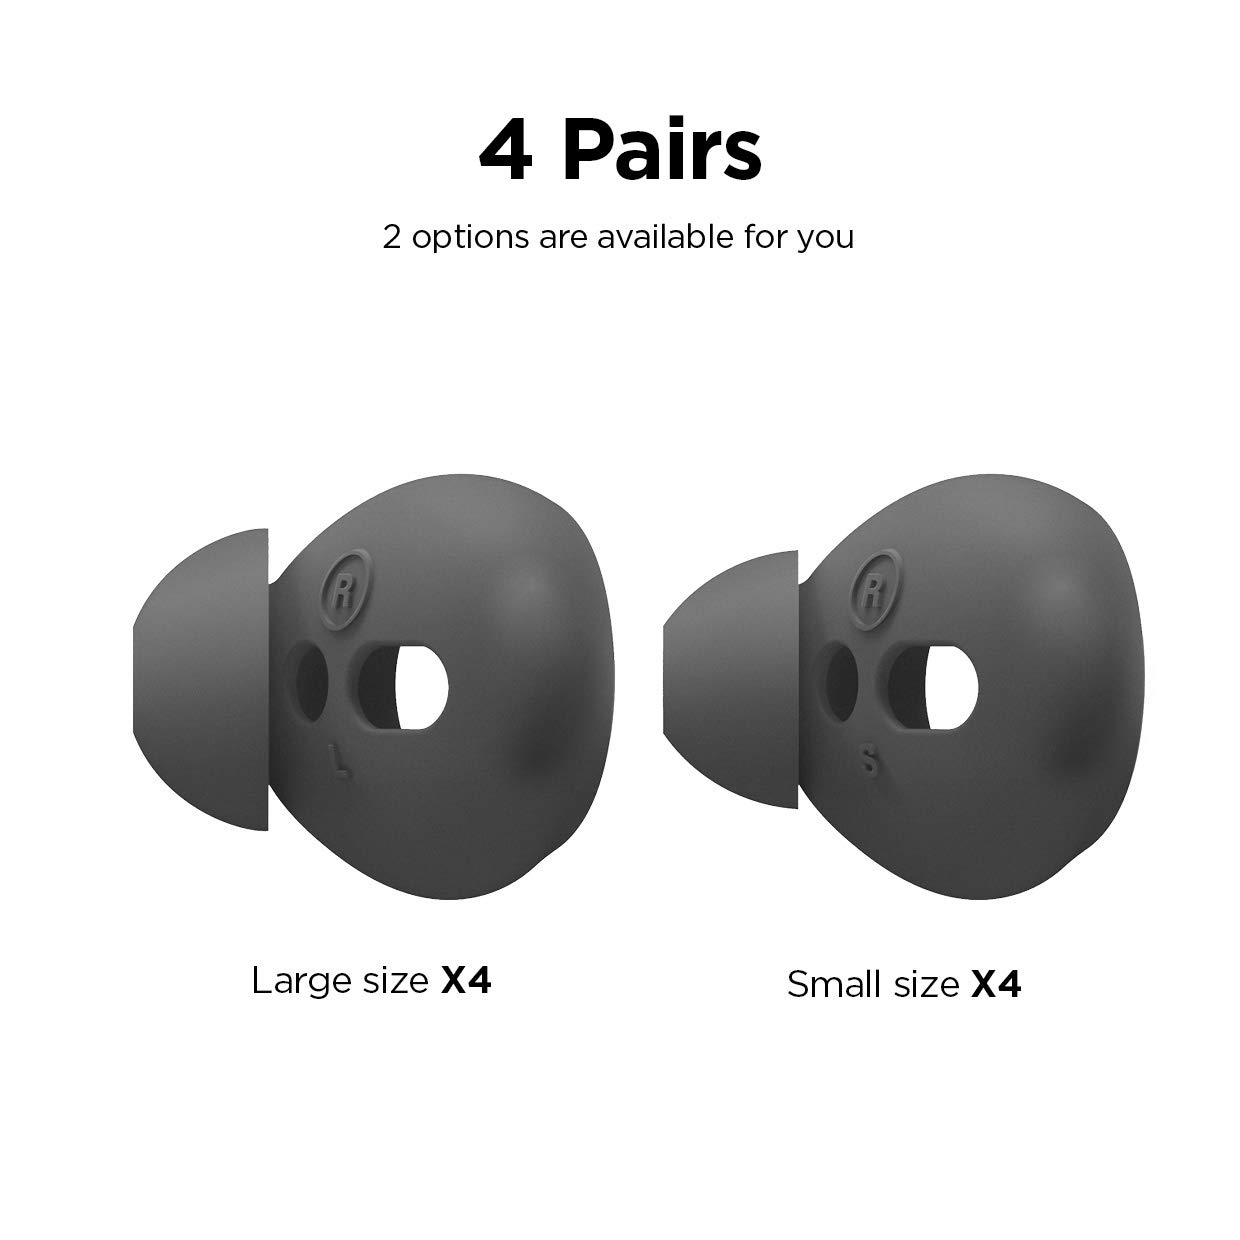 elago Earbuds Cover Designed for Apple AirPods 2 & 1 or EarPods, Silicone Ear Tips, Ear Grip, Sound Quality Enhancement [4 Pairs: 2 Large + 2 Small] (Dark Grey)